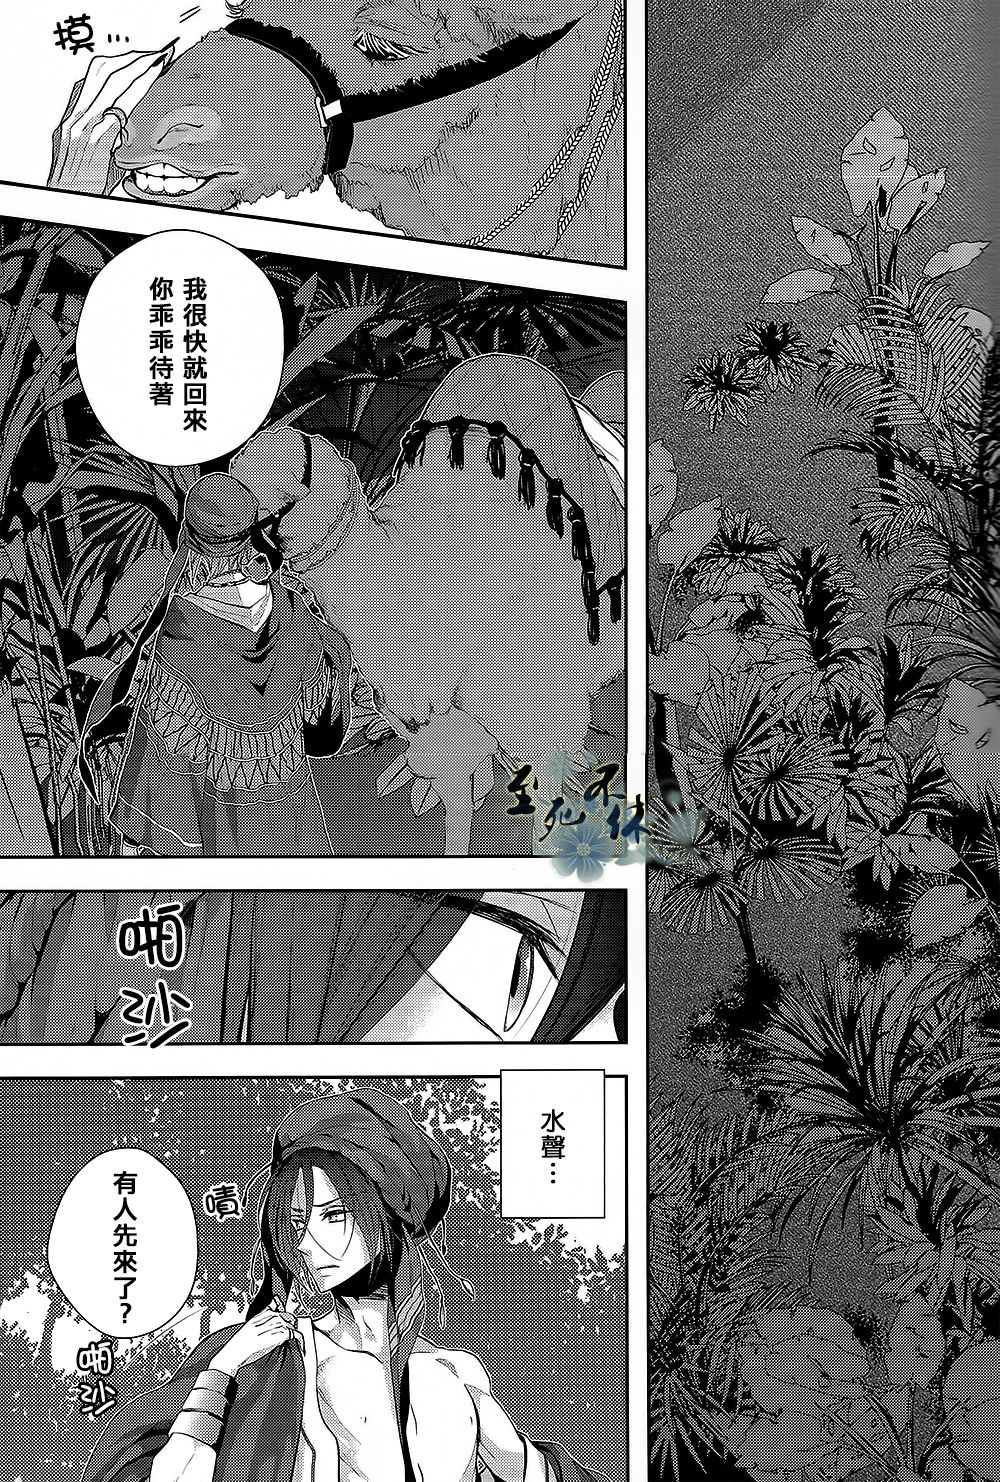 (SUPERKansai19) [Ibe (Inose)] An Oasis In The Desert (Free!) [Chinese] (SUPER関西19) [Ibe (イノセ)] An oasis in the desert (Free!) [中国翻訳]